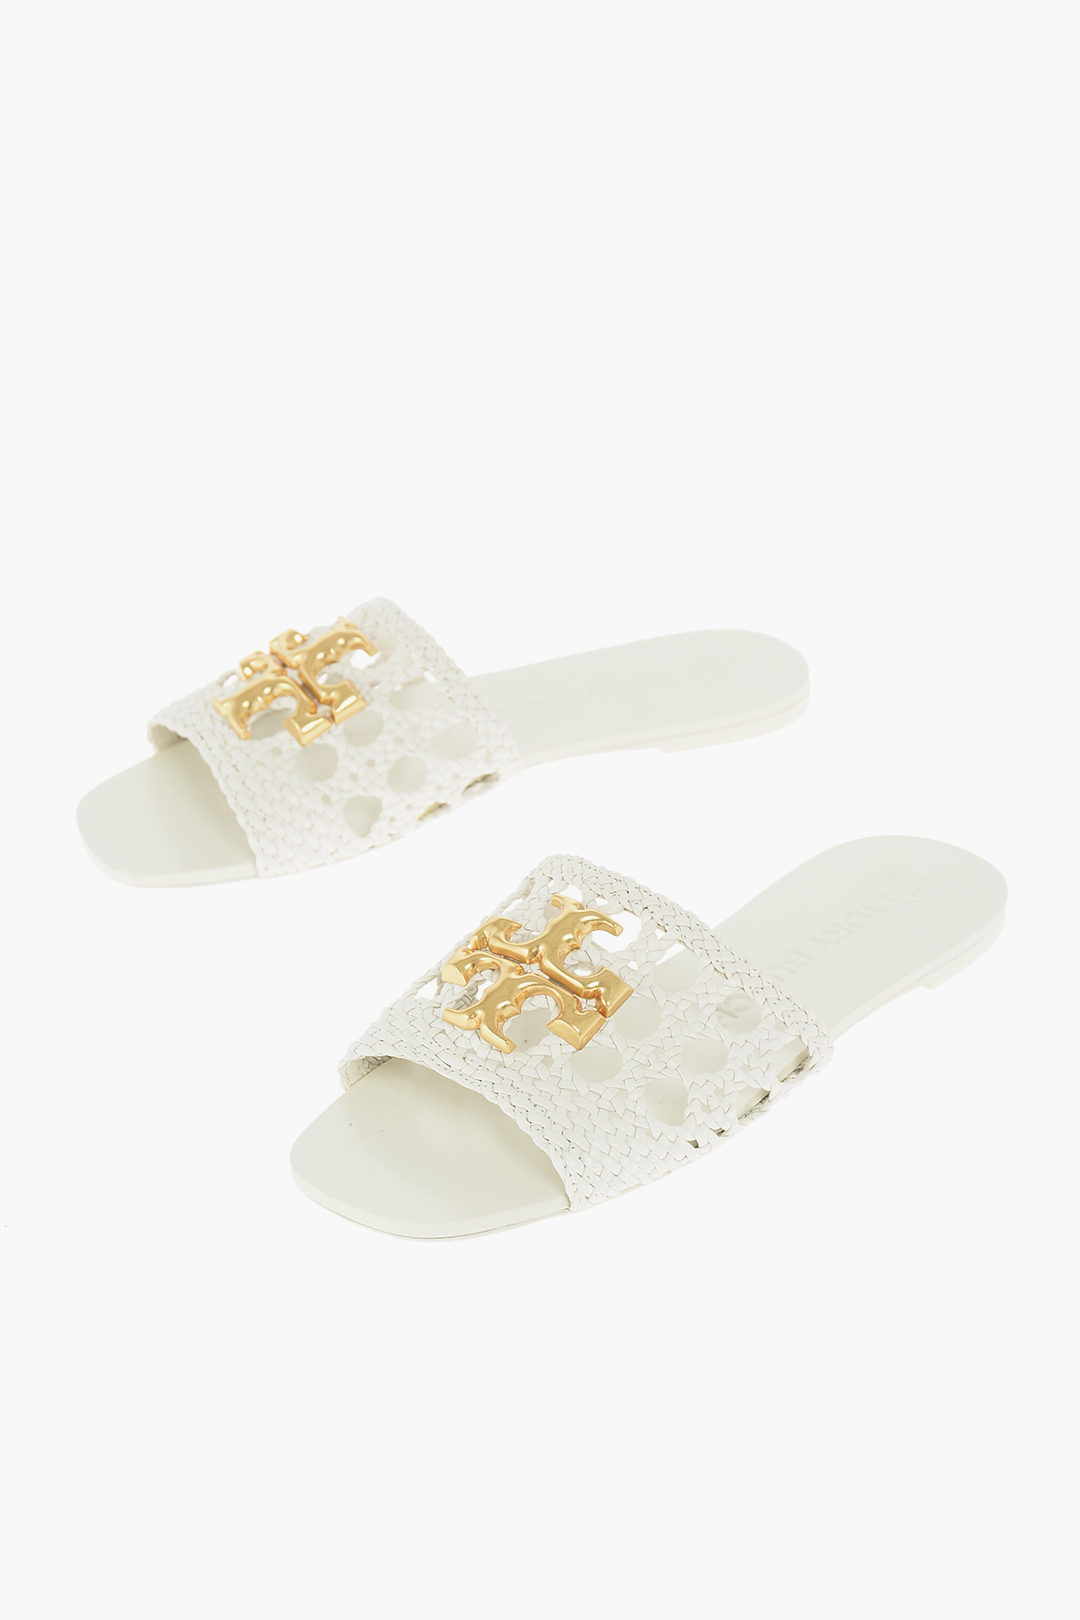 Tory Burch Metal Logo ELEANOR Leather Slippers women - Glamood Outlet